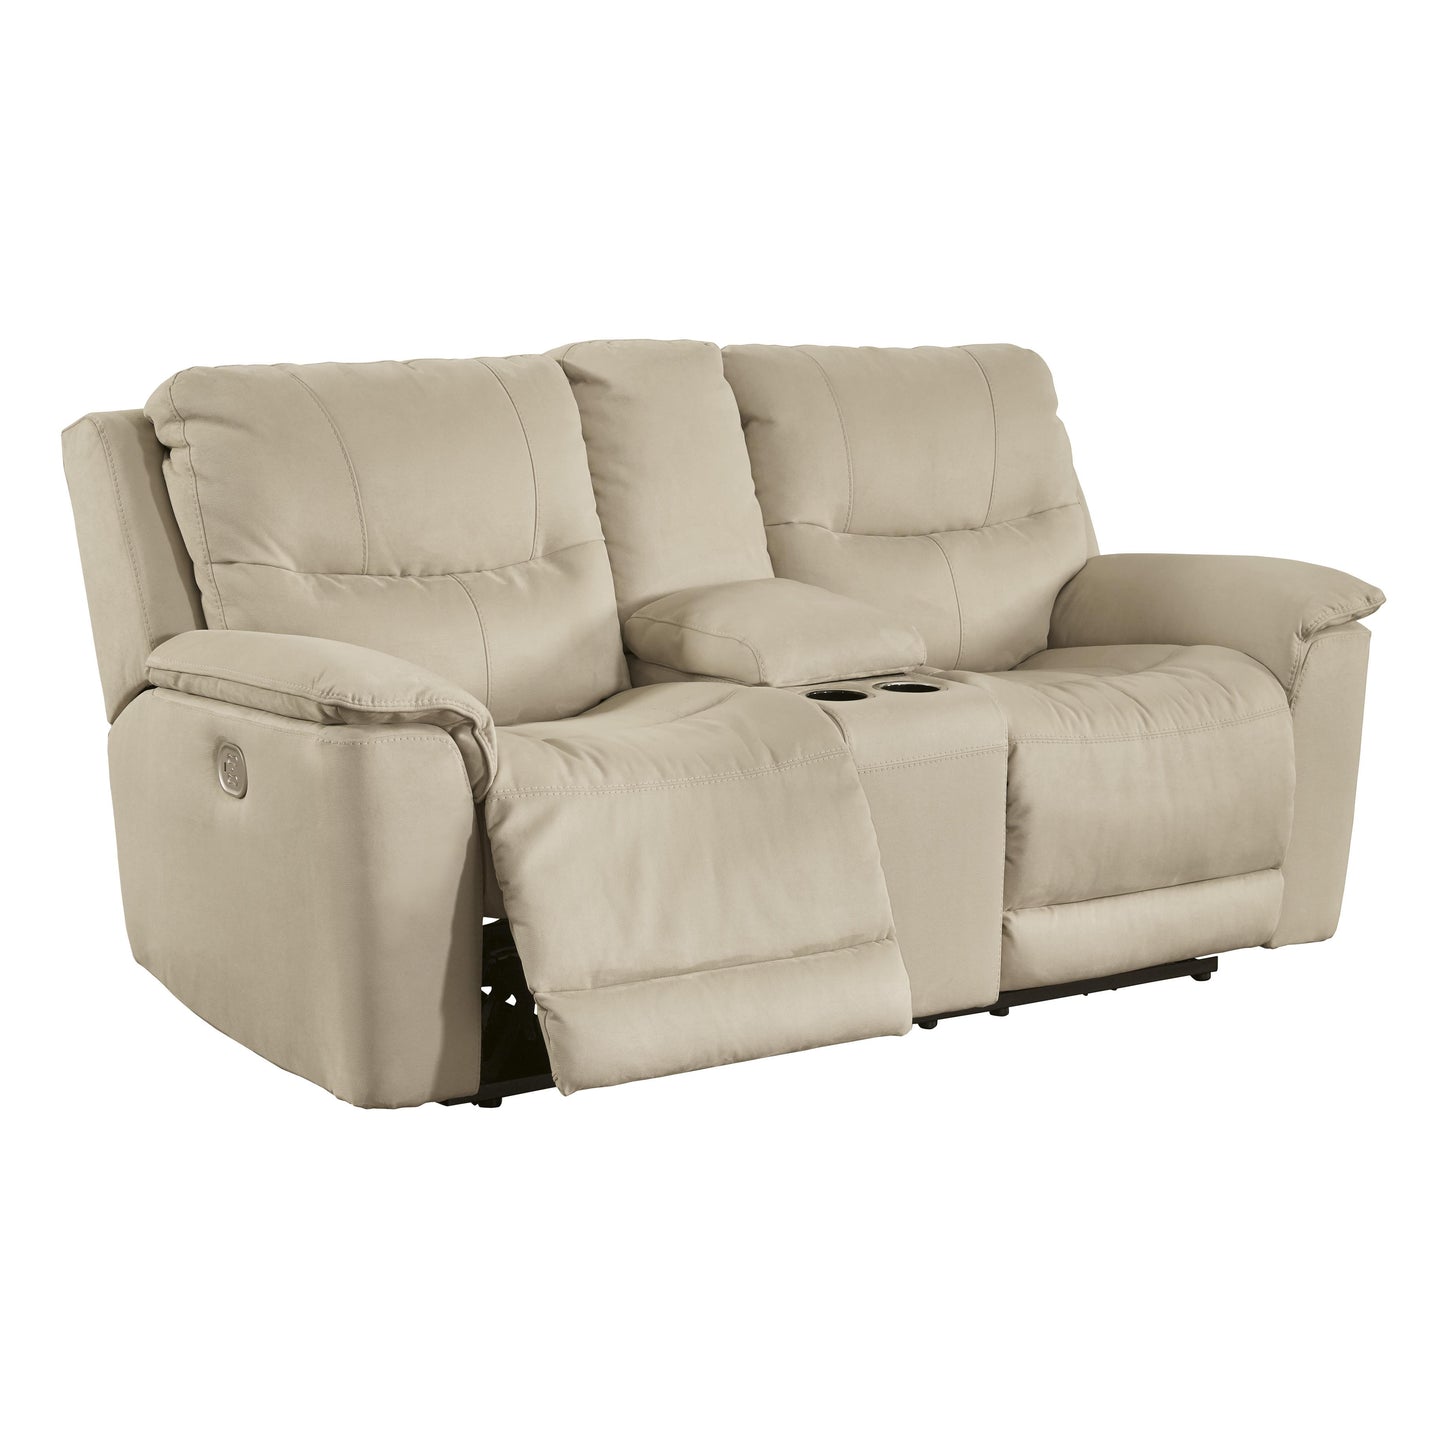 Signature Design by Ashley Next-Gen Gaucho Power Reclining Leather Look Loveseat 6080718 IMAGE 2